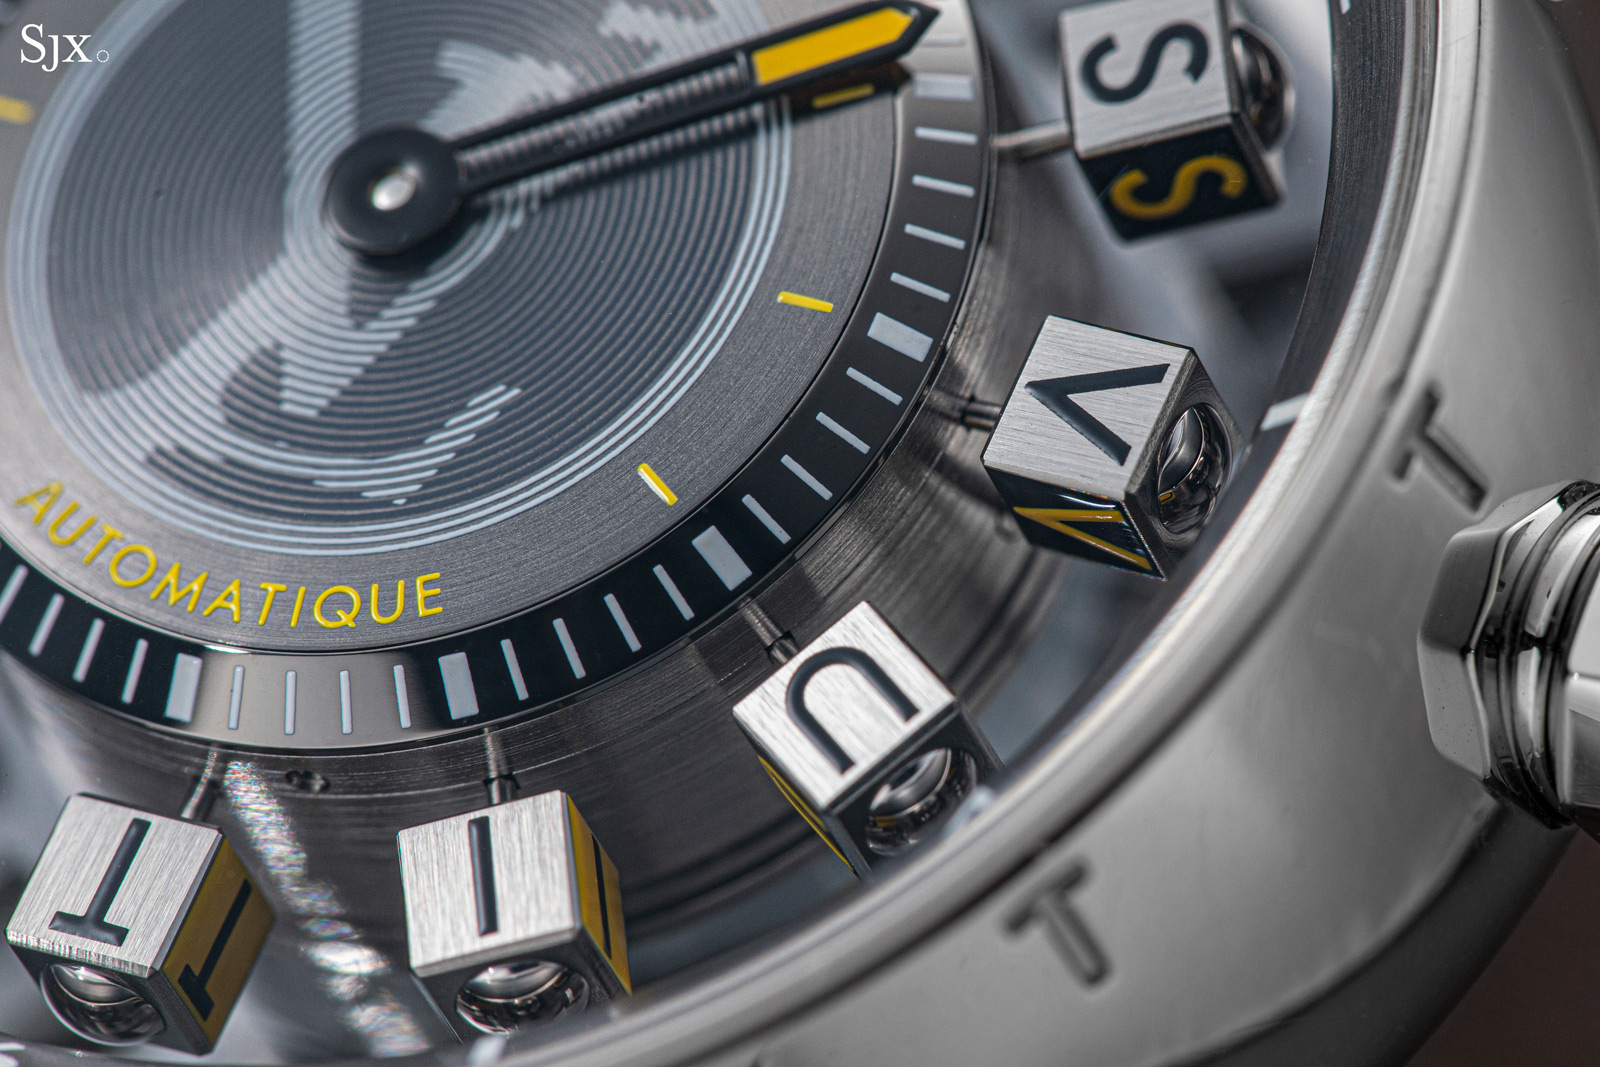 Louis Vuitton Tambour Spin Time Air watch: It's transformed